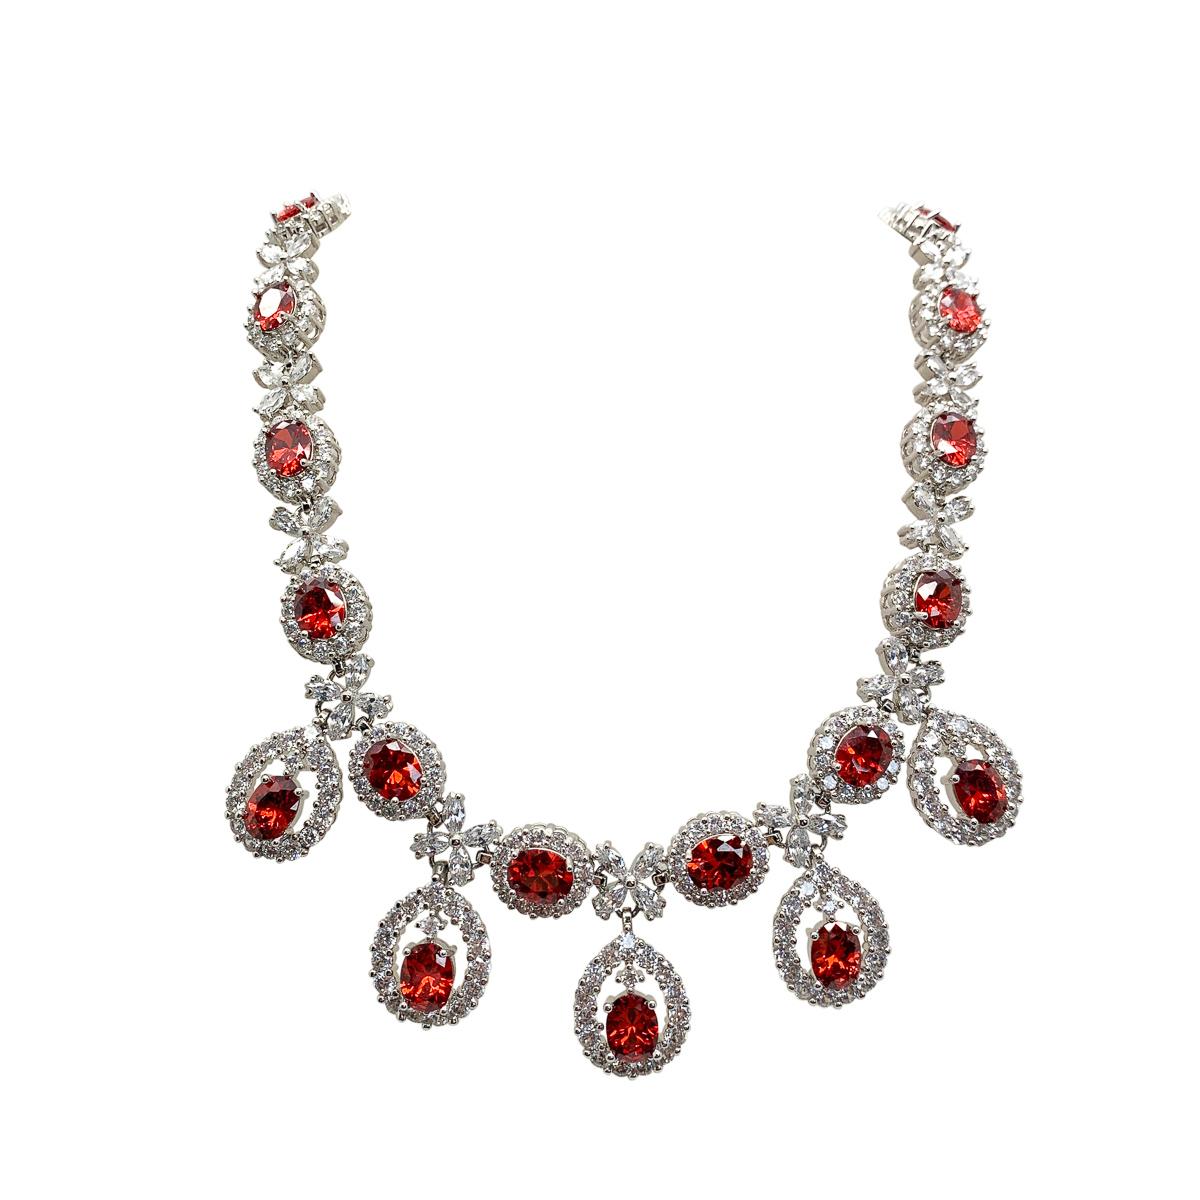 A vintage fire crystal necklace and earrings. Featuring a collar of classic ovals leading droplets topped with marquise stones. The earrings mirroring the necklace design to perfection. The red stones have an orangey red tinge reminiscent of fire